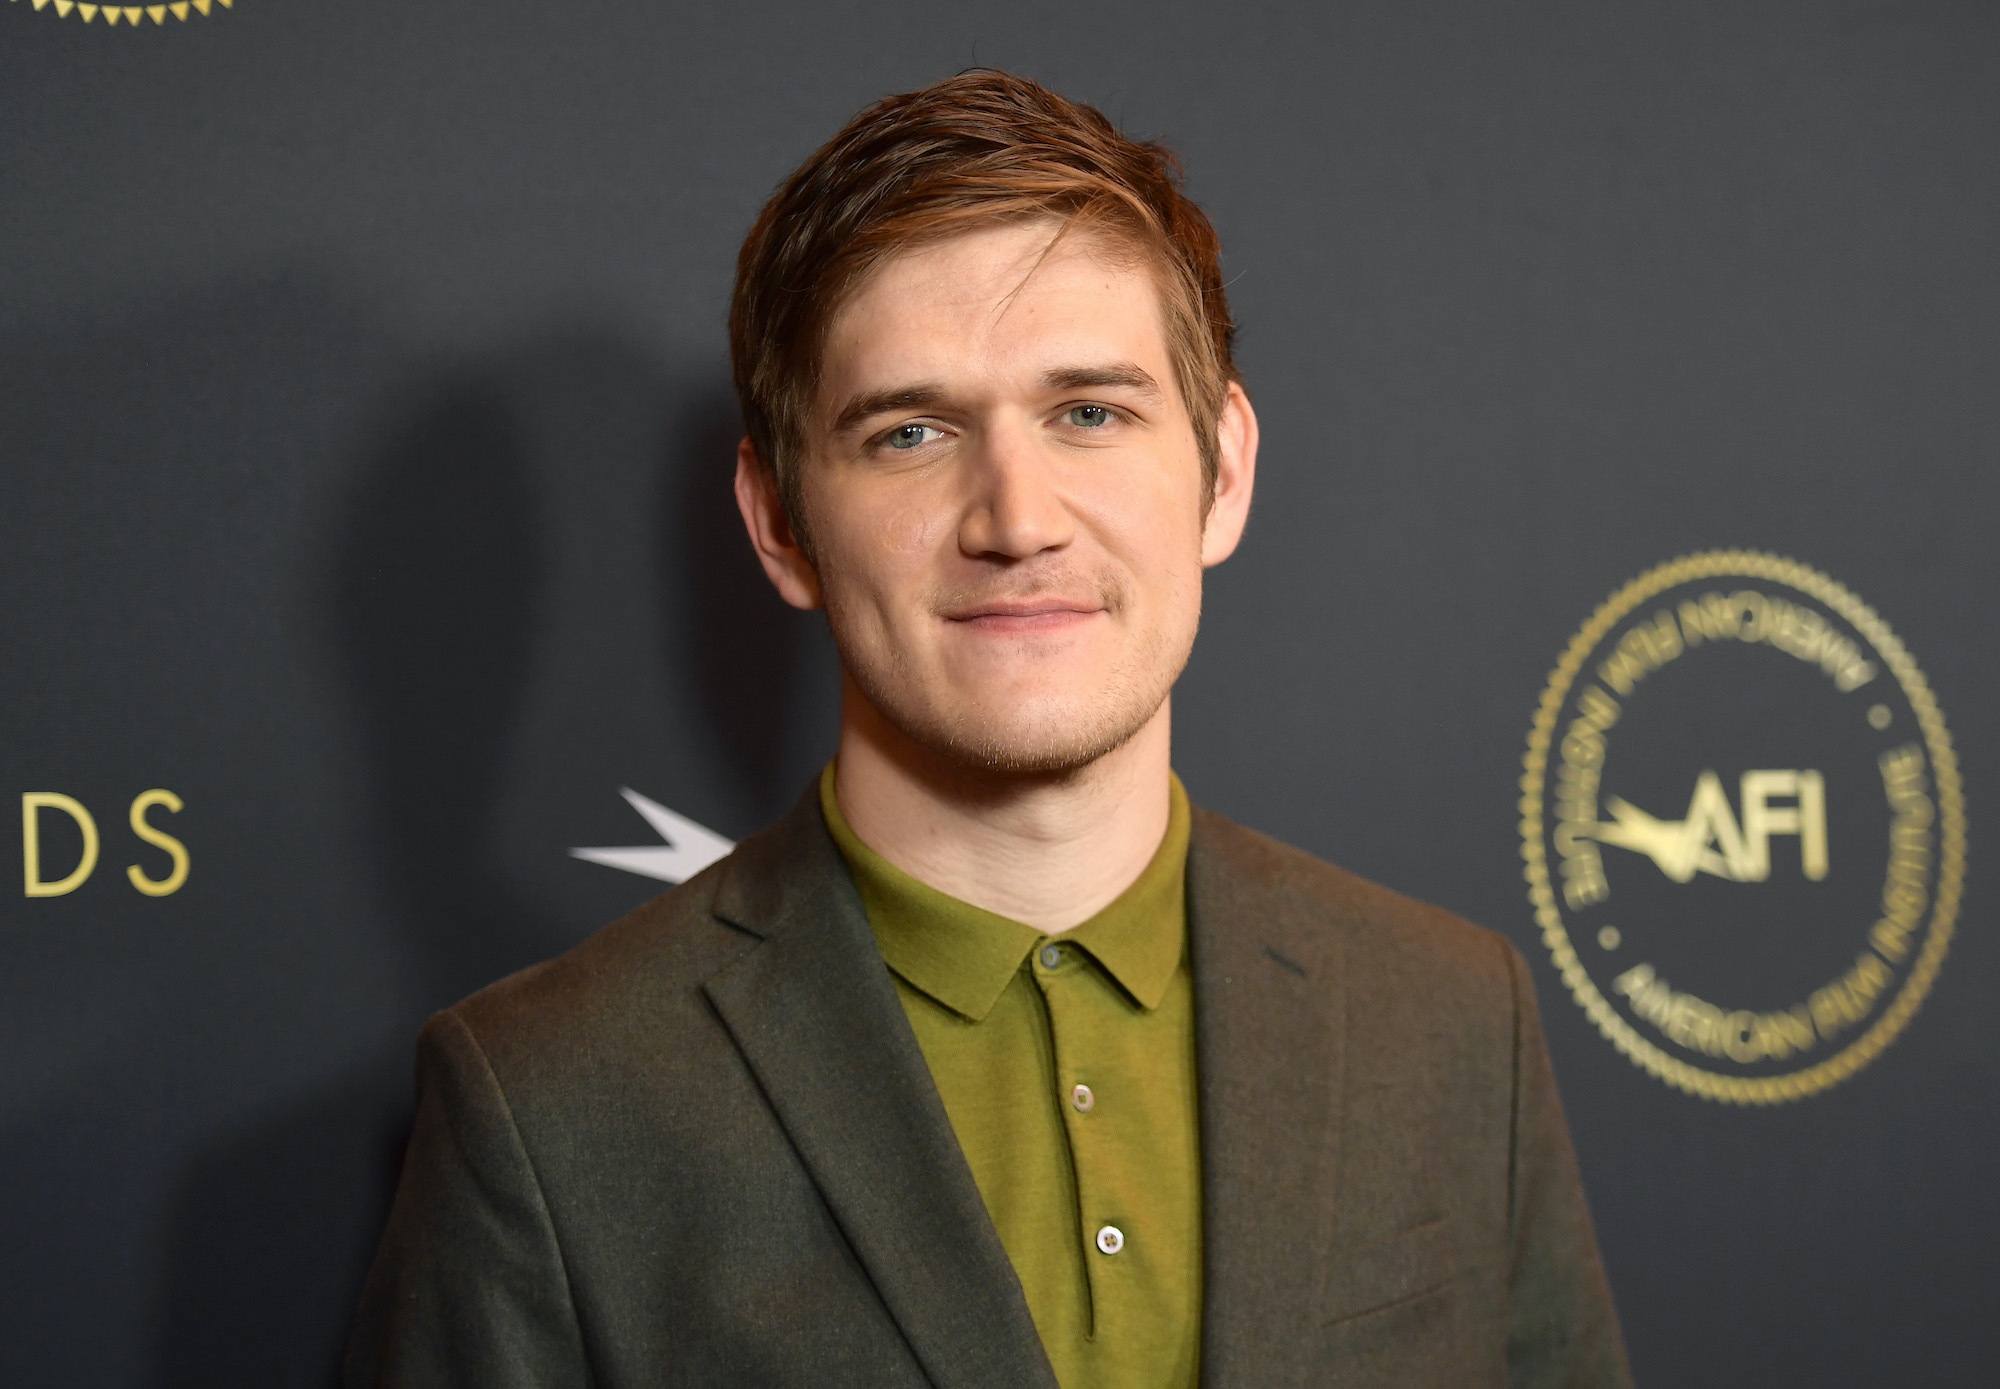 Bo Burnham smiling in front of a gray background